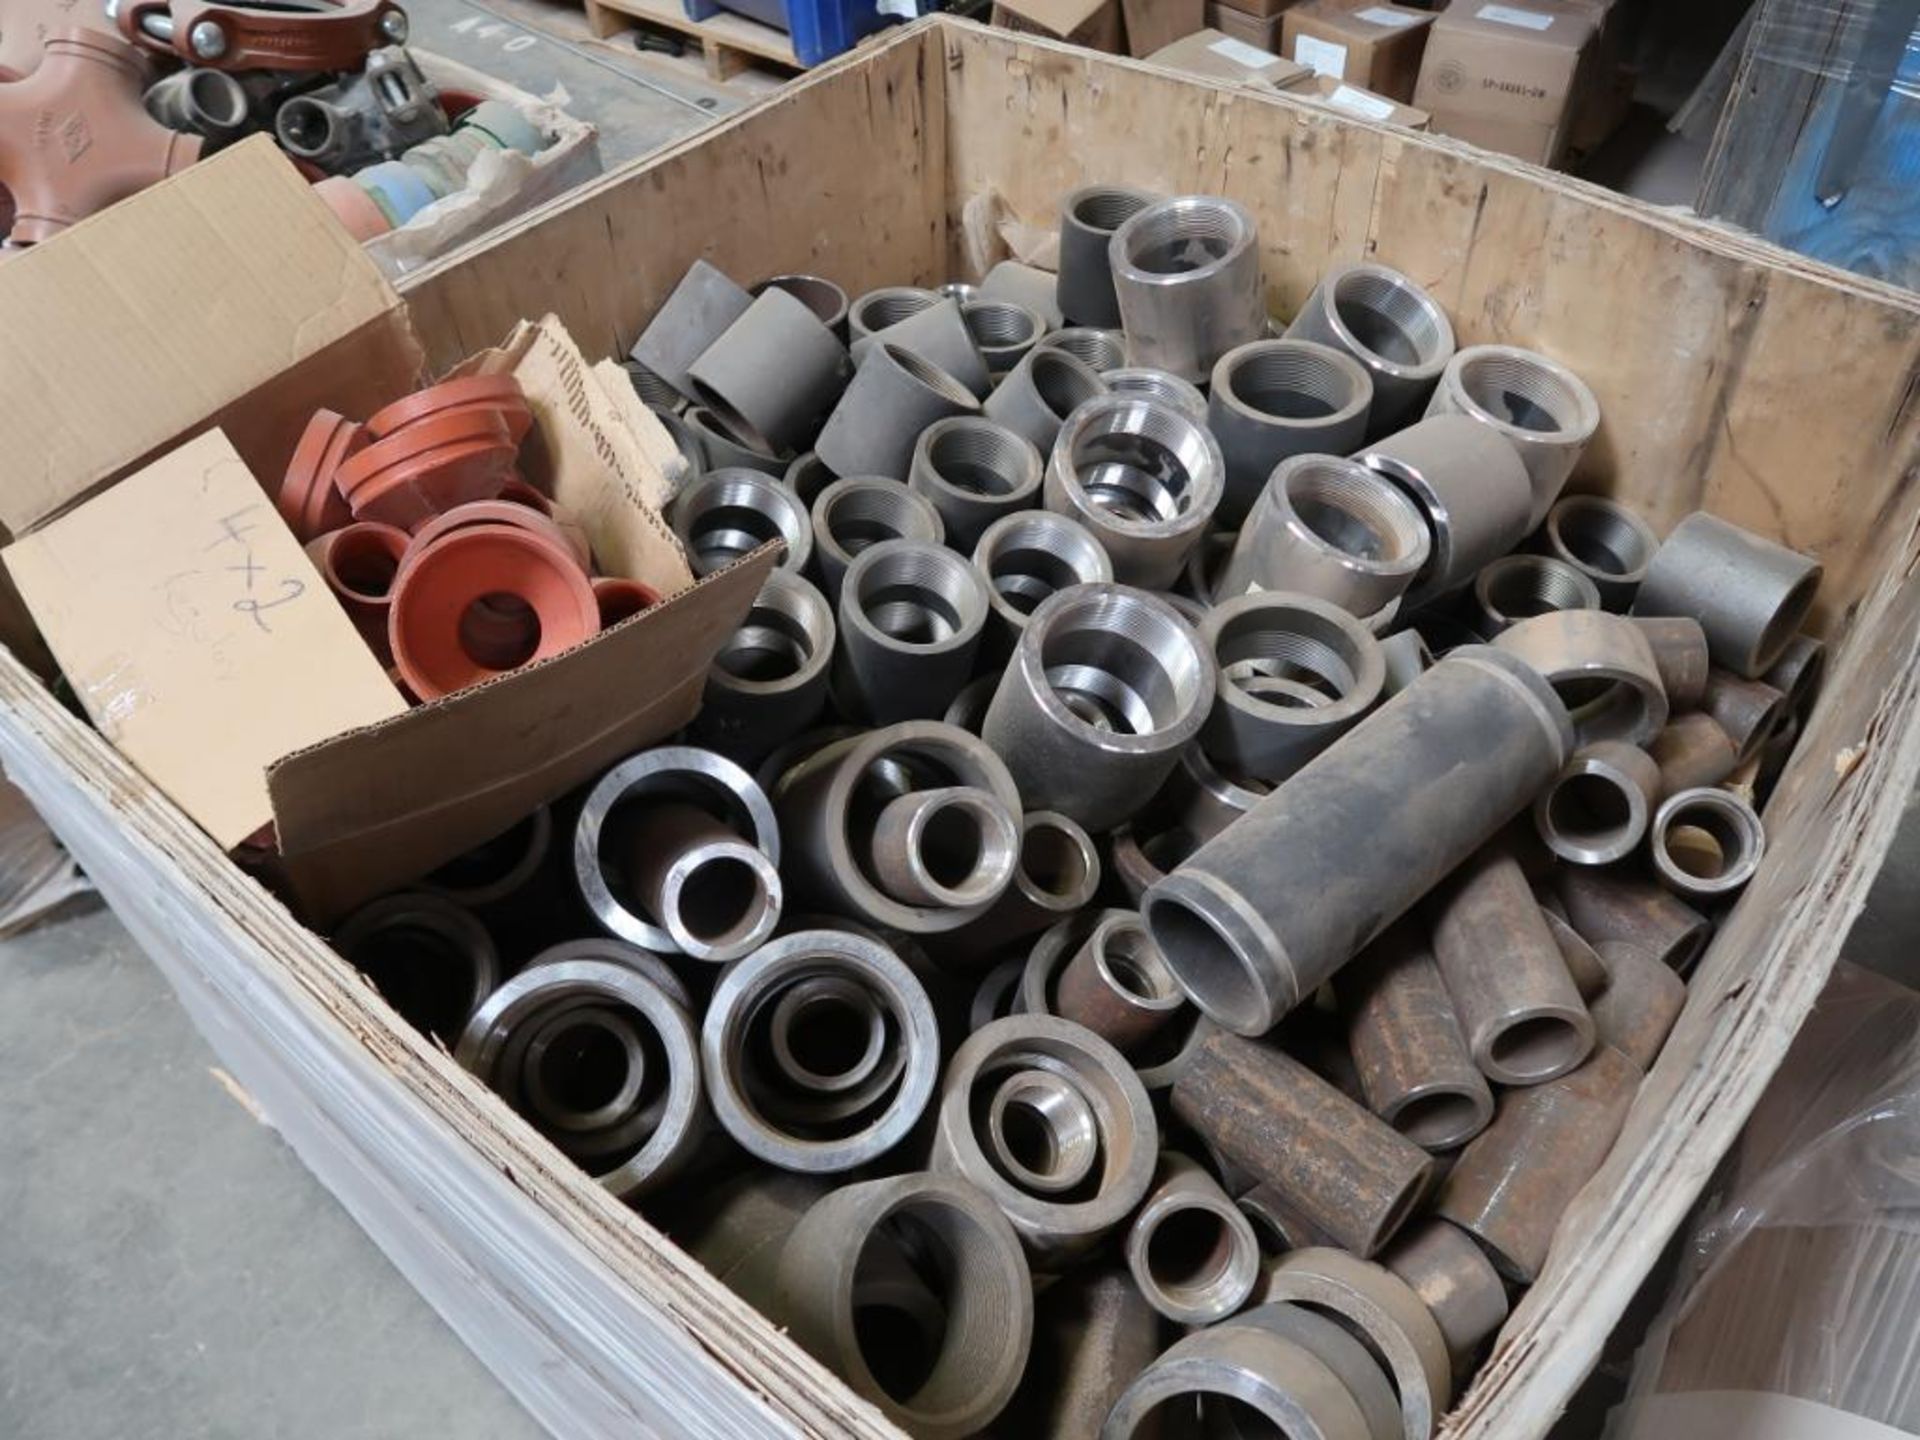 (10) PALLETS INCLUIDNG ASSORTED PIPE UNIONS AND PIPE FITTINGS - Image 4 of 11